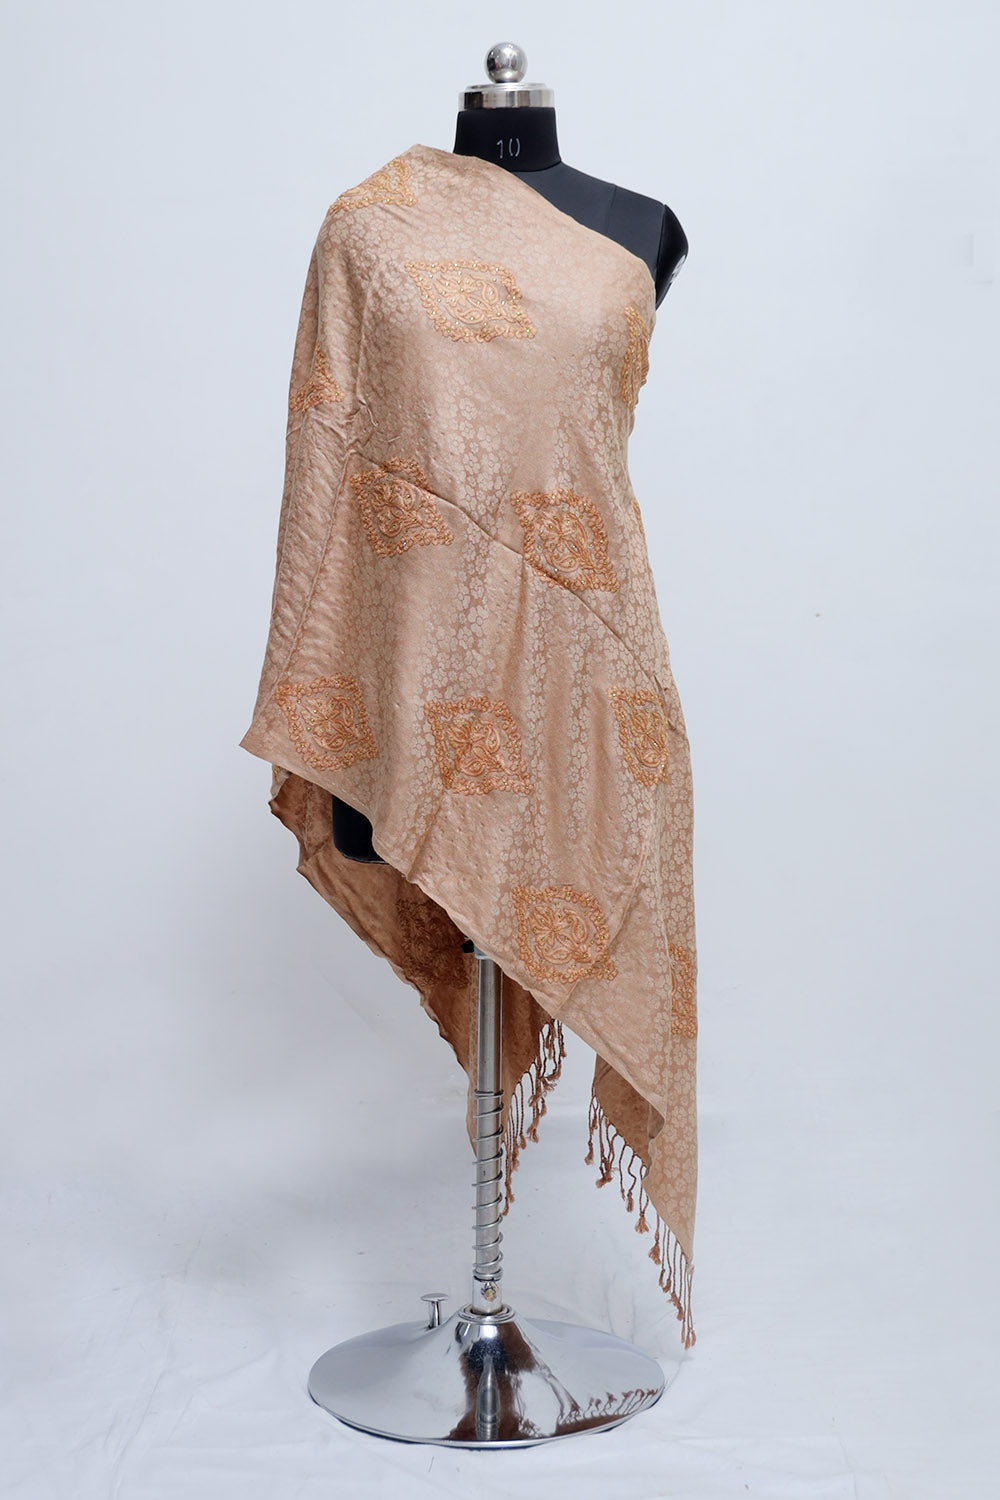 Fawn Colour Stole Enriched With Aari Embroidery And A Touch